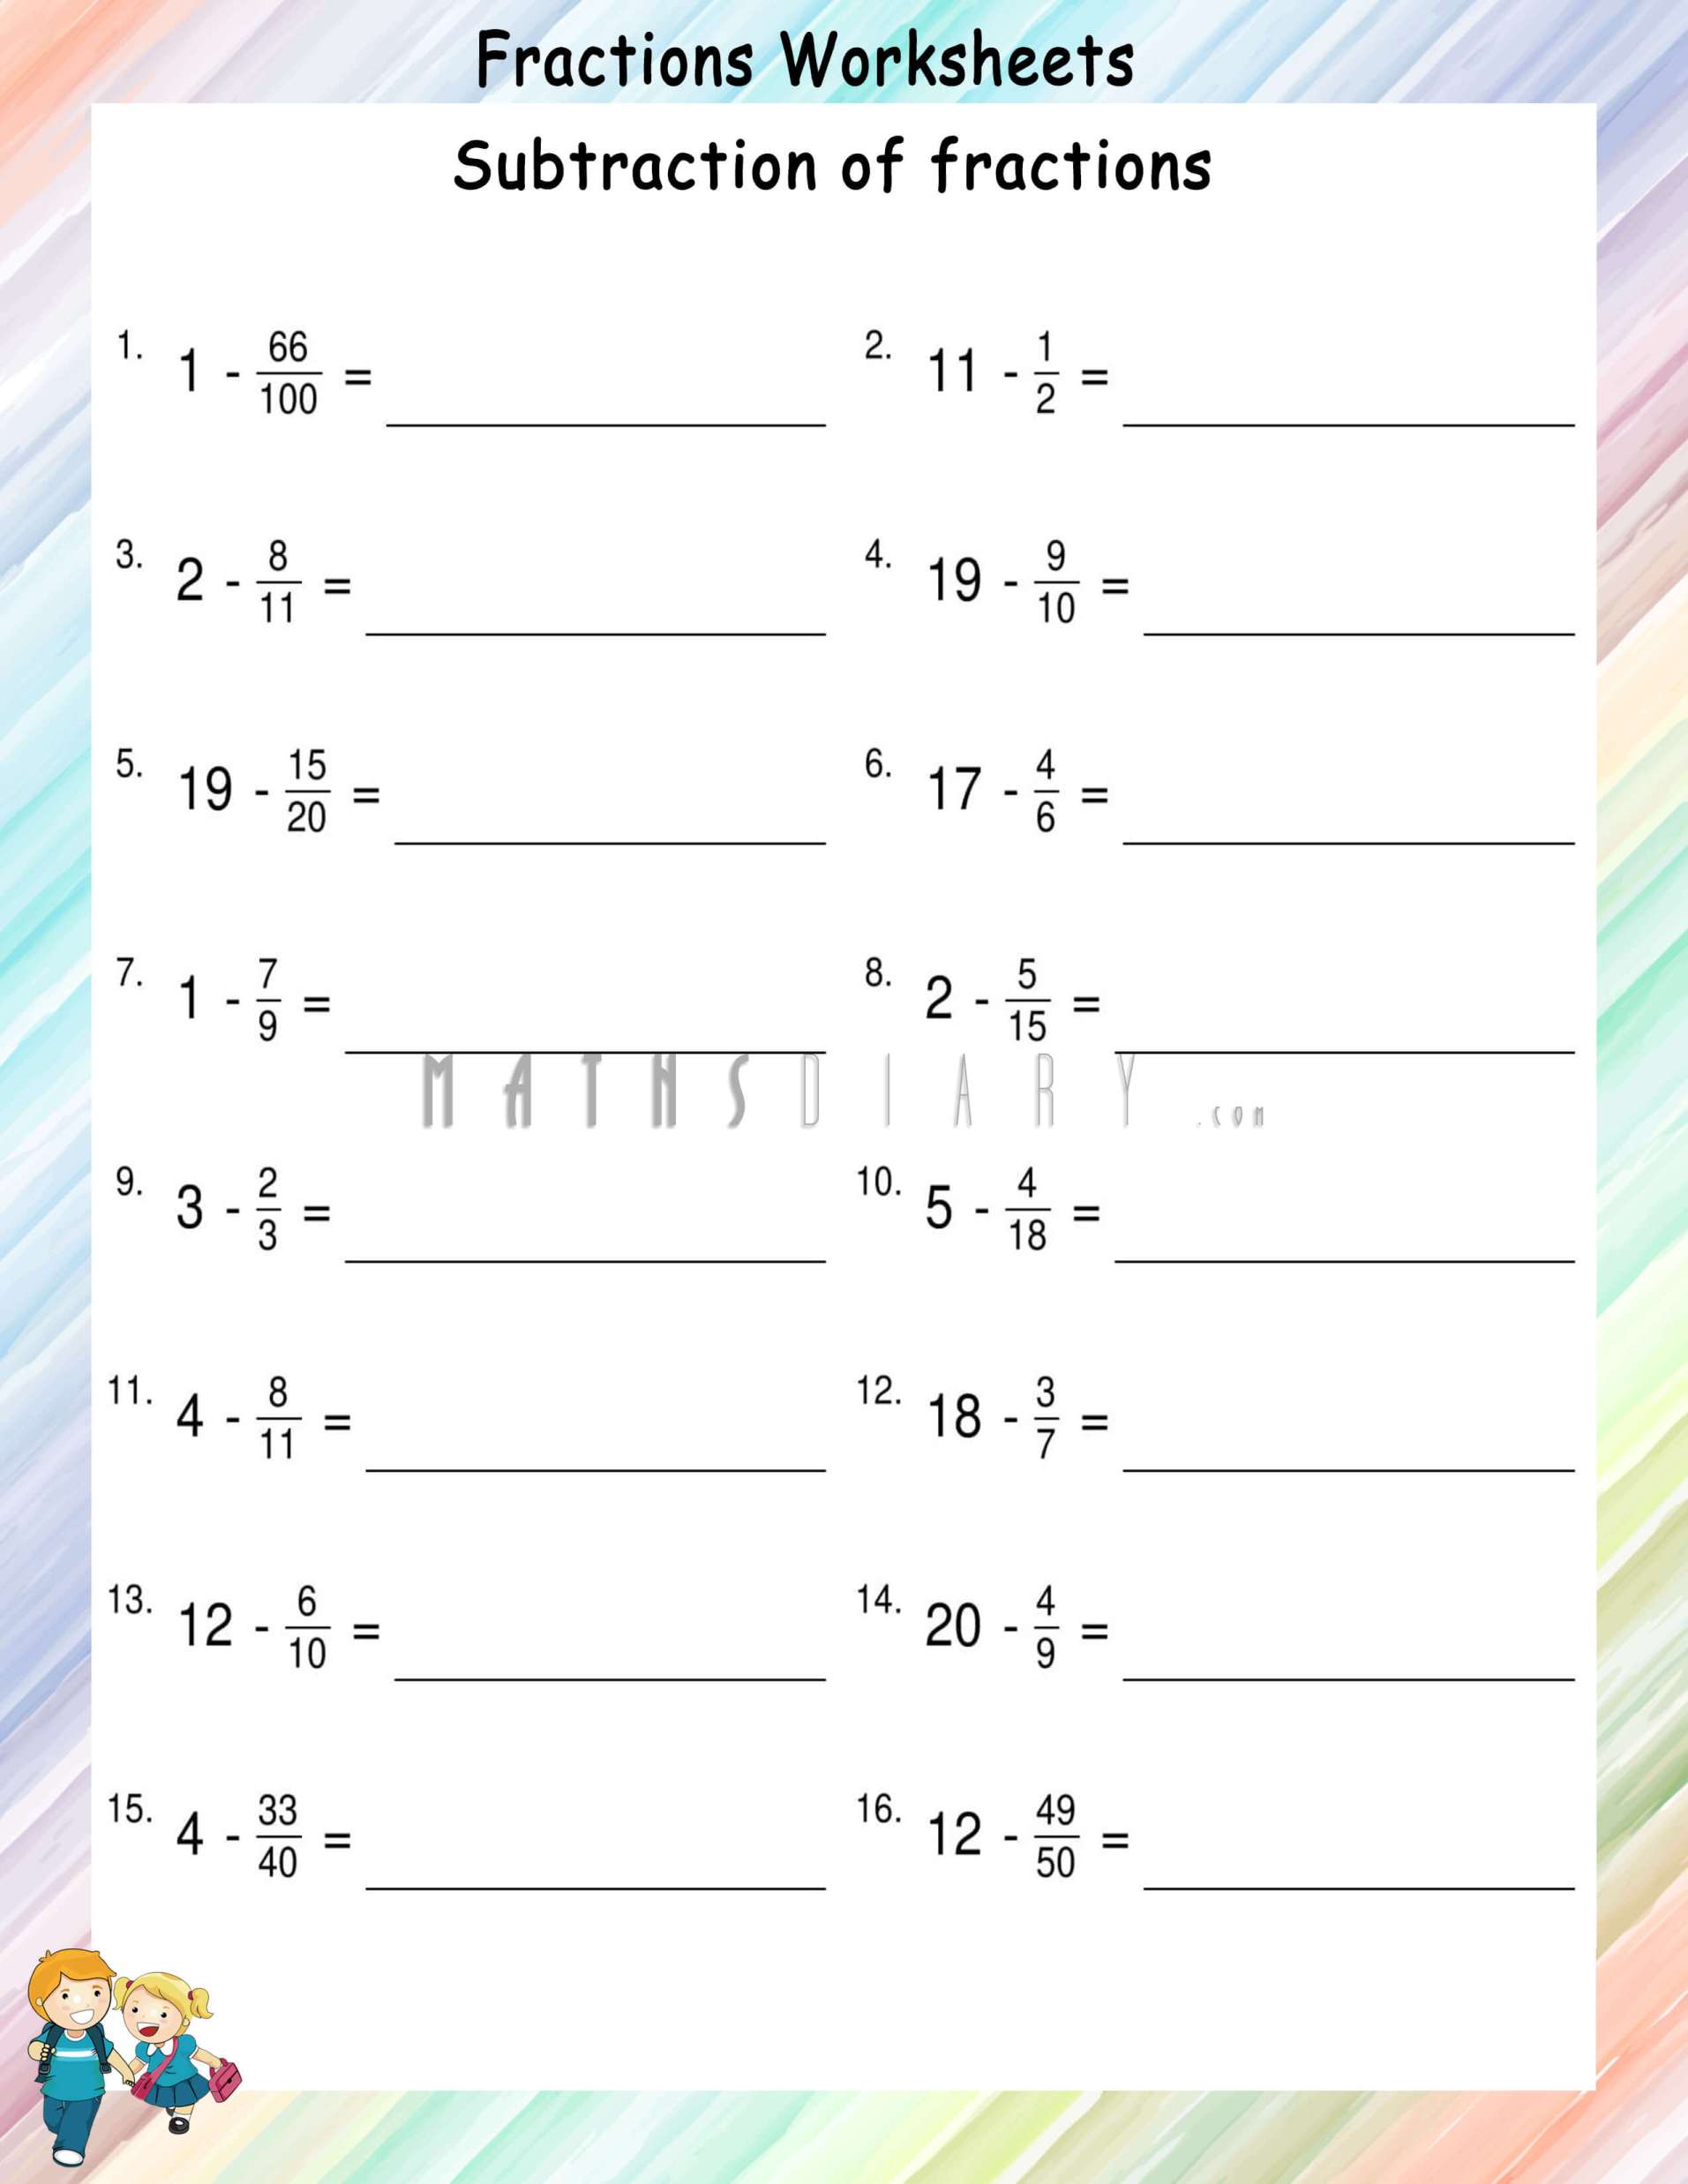 subtracting-fractions-from-whole-numbers-math-worksheets-mathsdiary